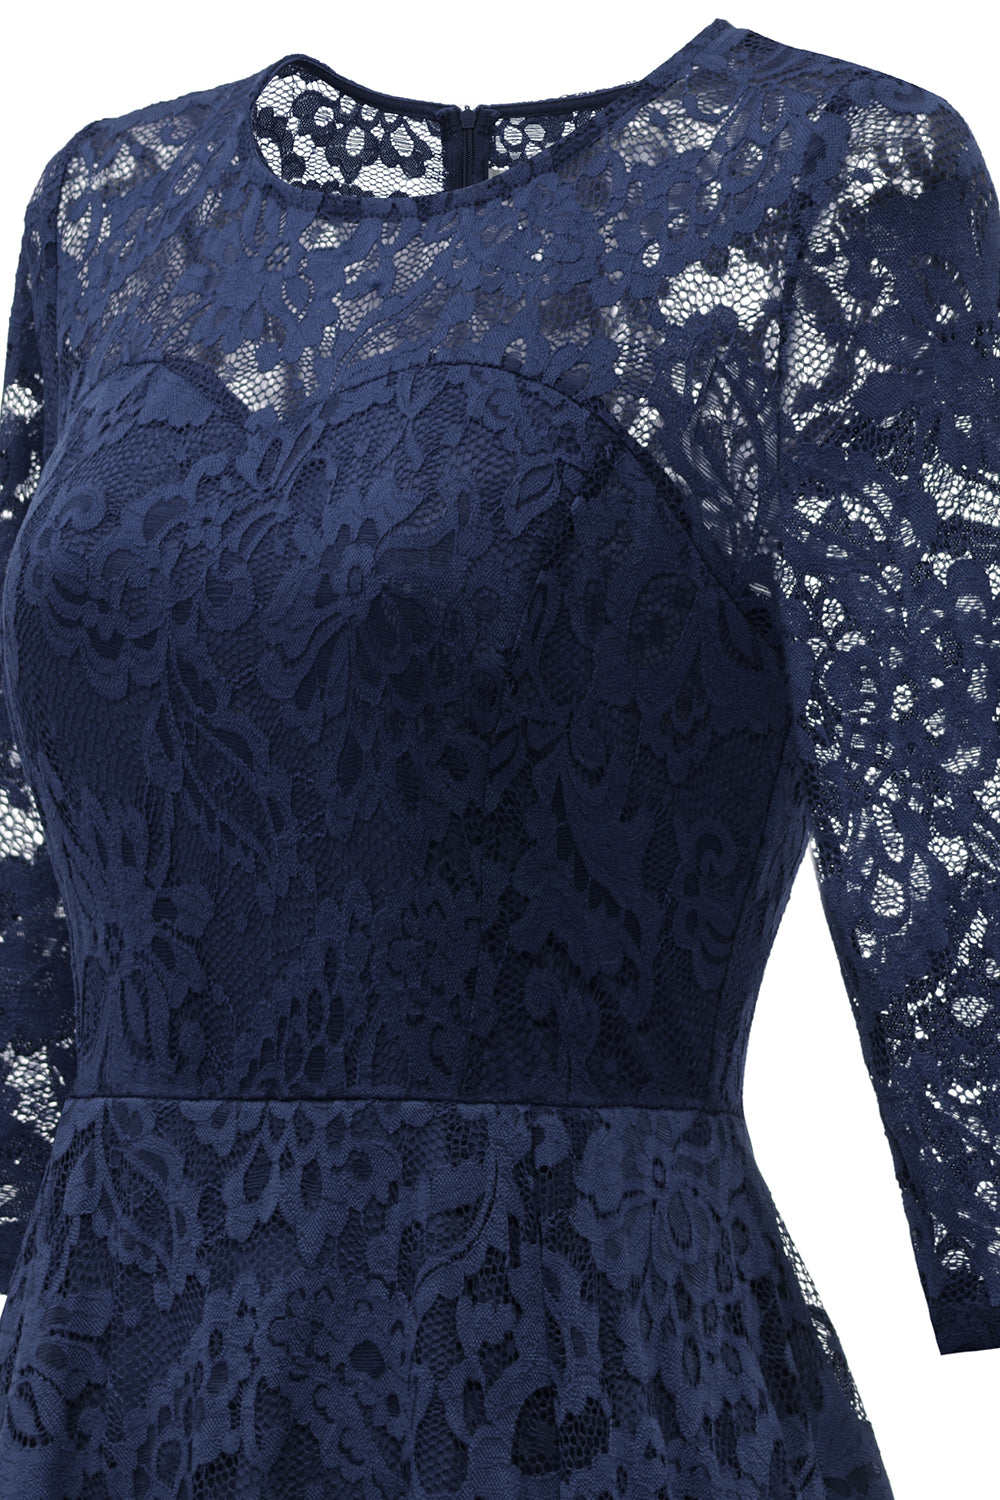 Navy High Low Lace Dress